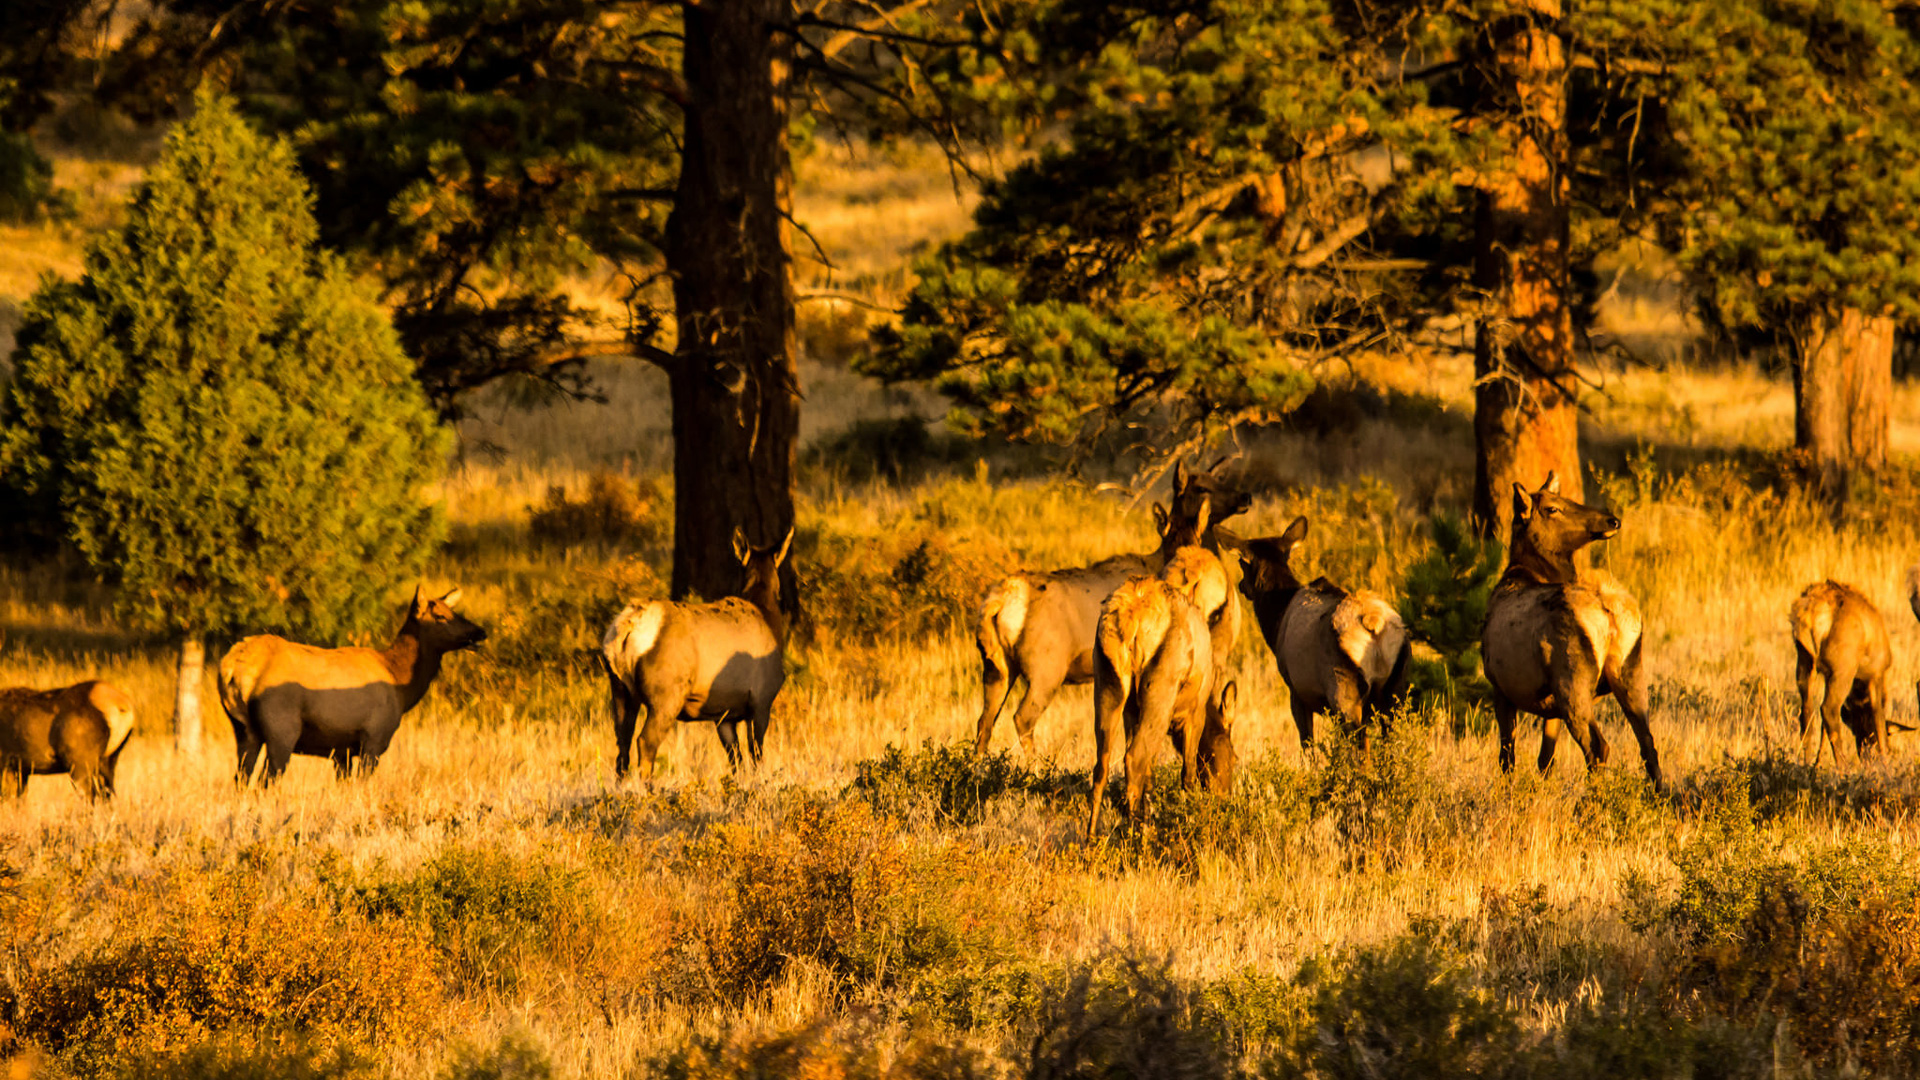 Elk at sunset in Rocky Mountain National Park. Photo © mark byzewski / Flickr through a Creative Commons license